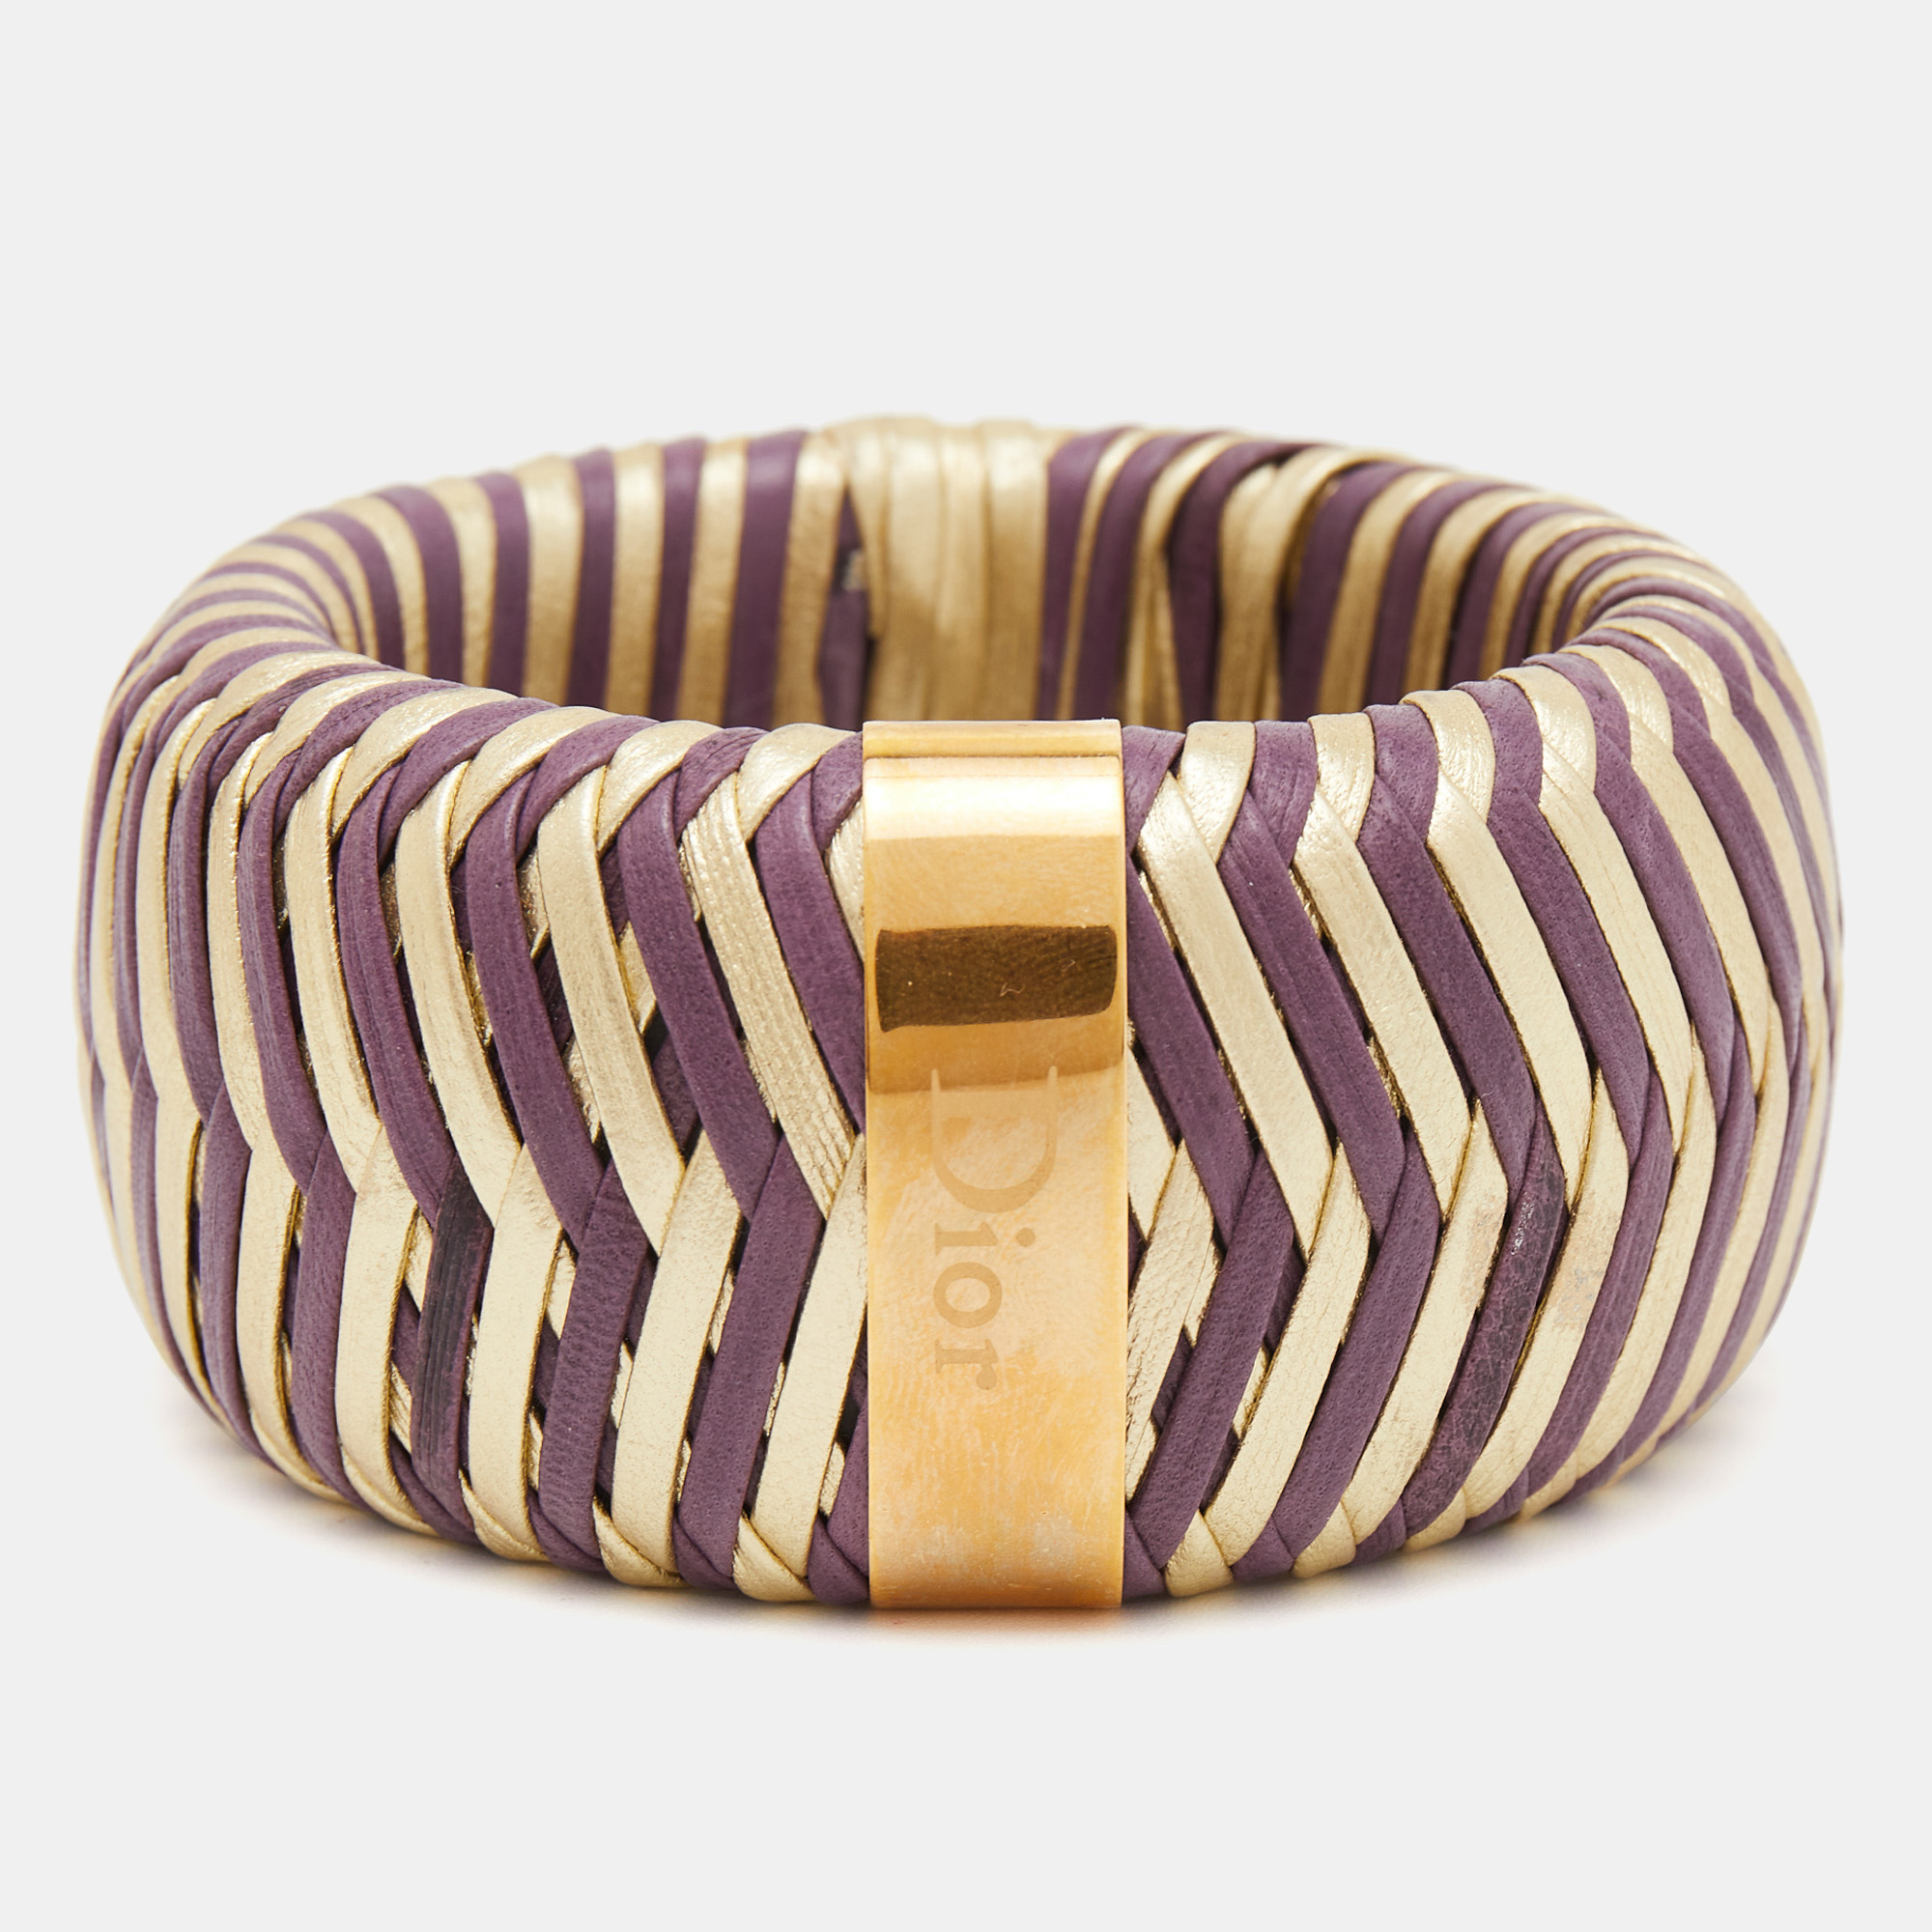 This Dior leather bracelet stands out in two colors. Made from leather it has a chevron like woven design finished with a gold tone metal accent carrying the brand name.